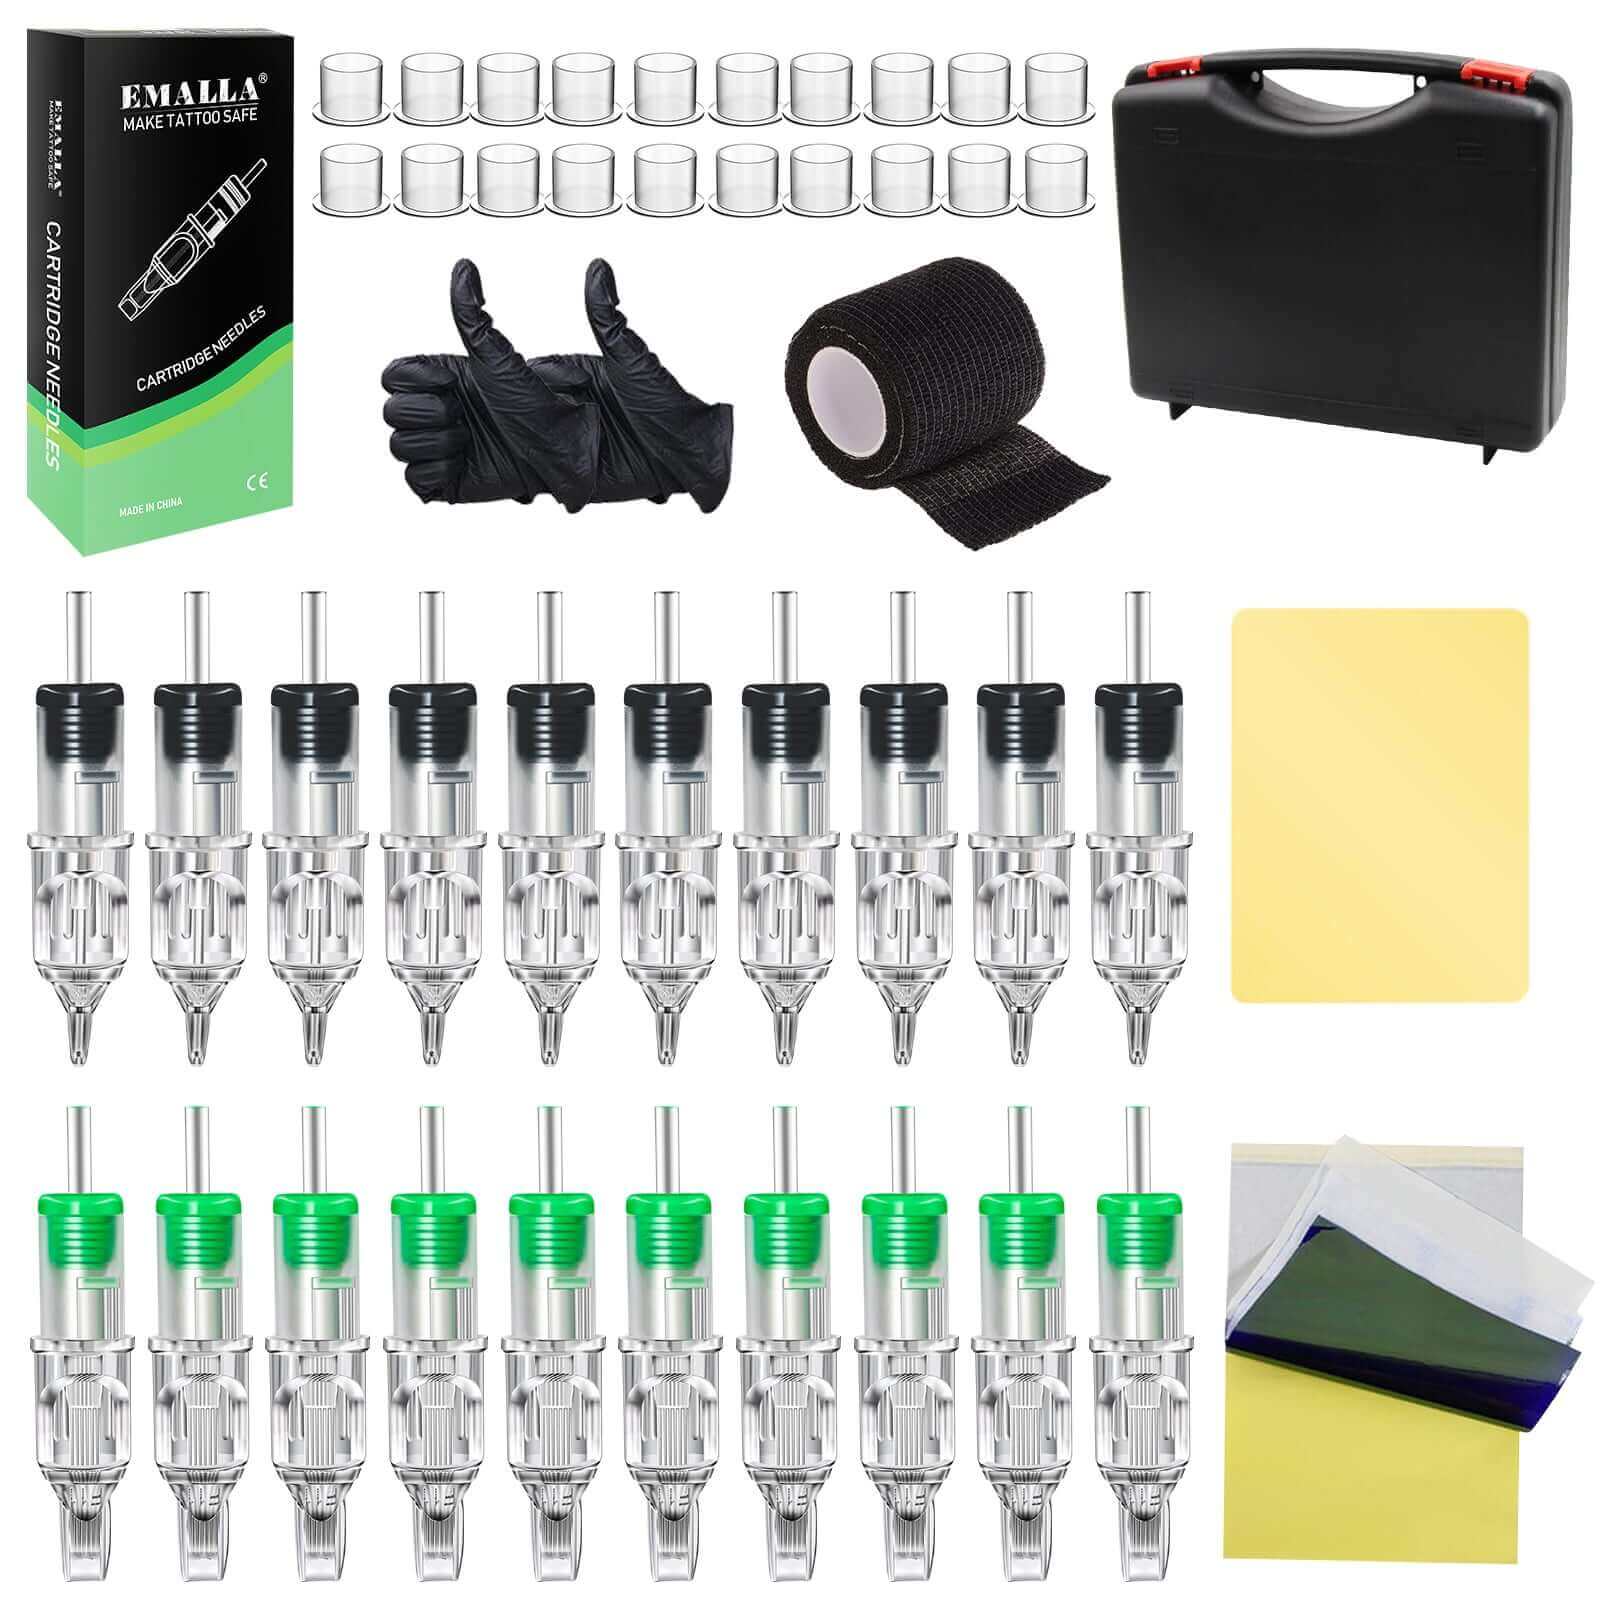 Components of basic Tattoo Pen Kits in Eamlla T2S Tattoo Machine Pen with Tattoo Power Supply Bundle